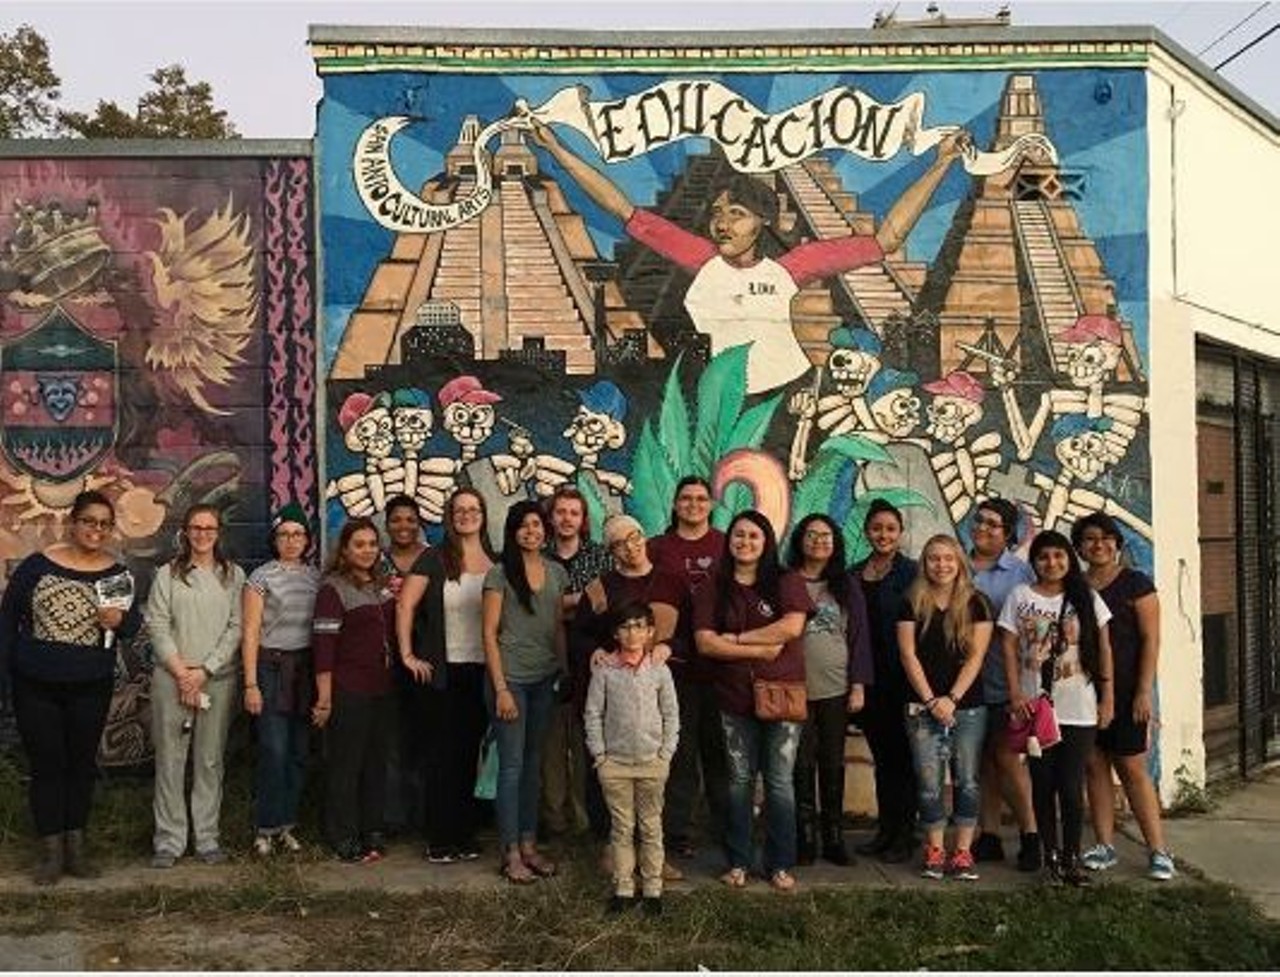 Educaci&oacute;n Mural
2121 Guadalupe St.
This mural is a San Antonio must see. Don&#146;t let this amazing picture opportunity pass you by. 
Photo via Instagram 
saca_mural_art 
